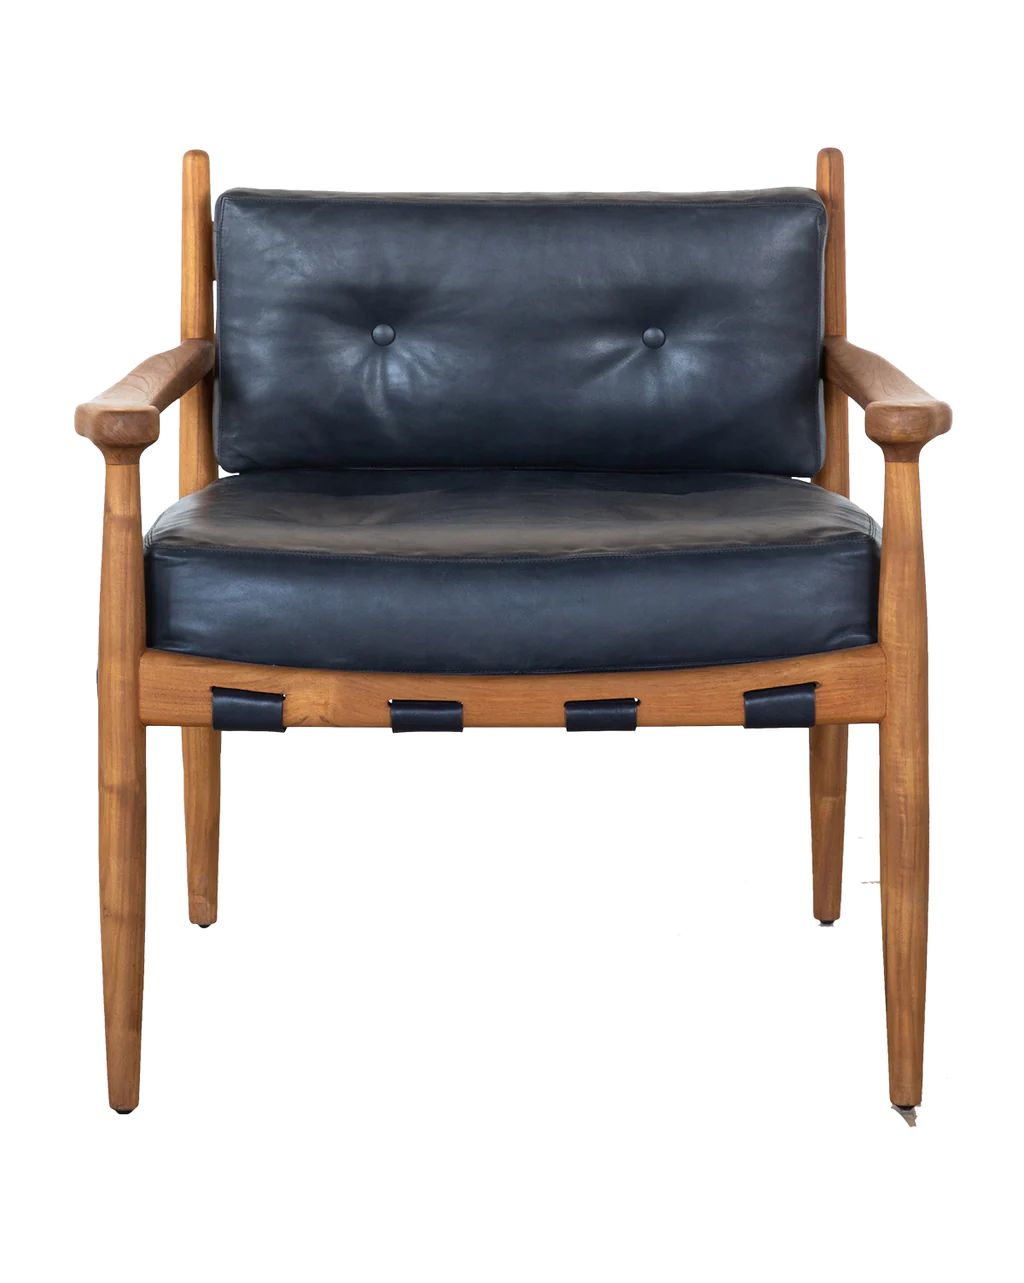 Forrest Leather Chair | McGee & Co.